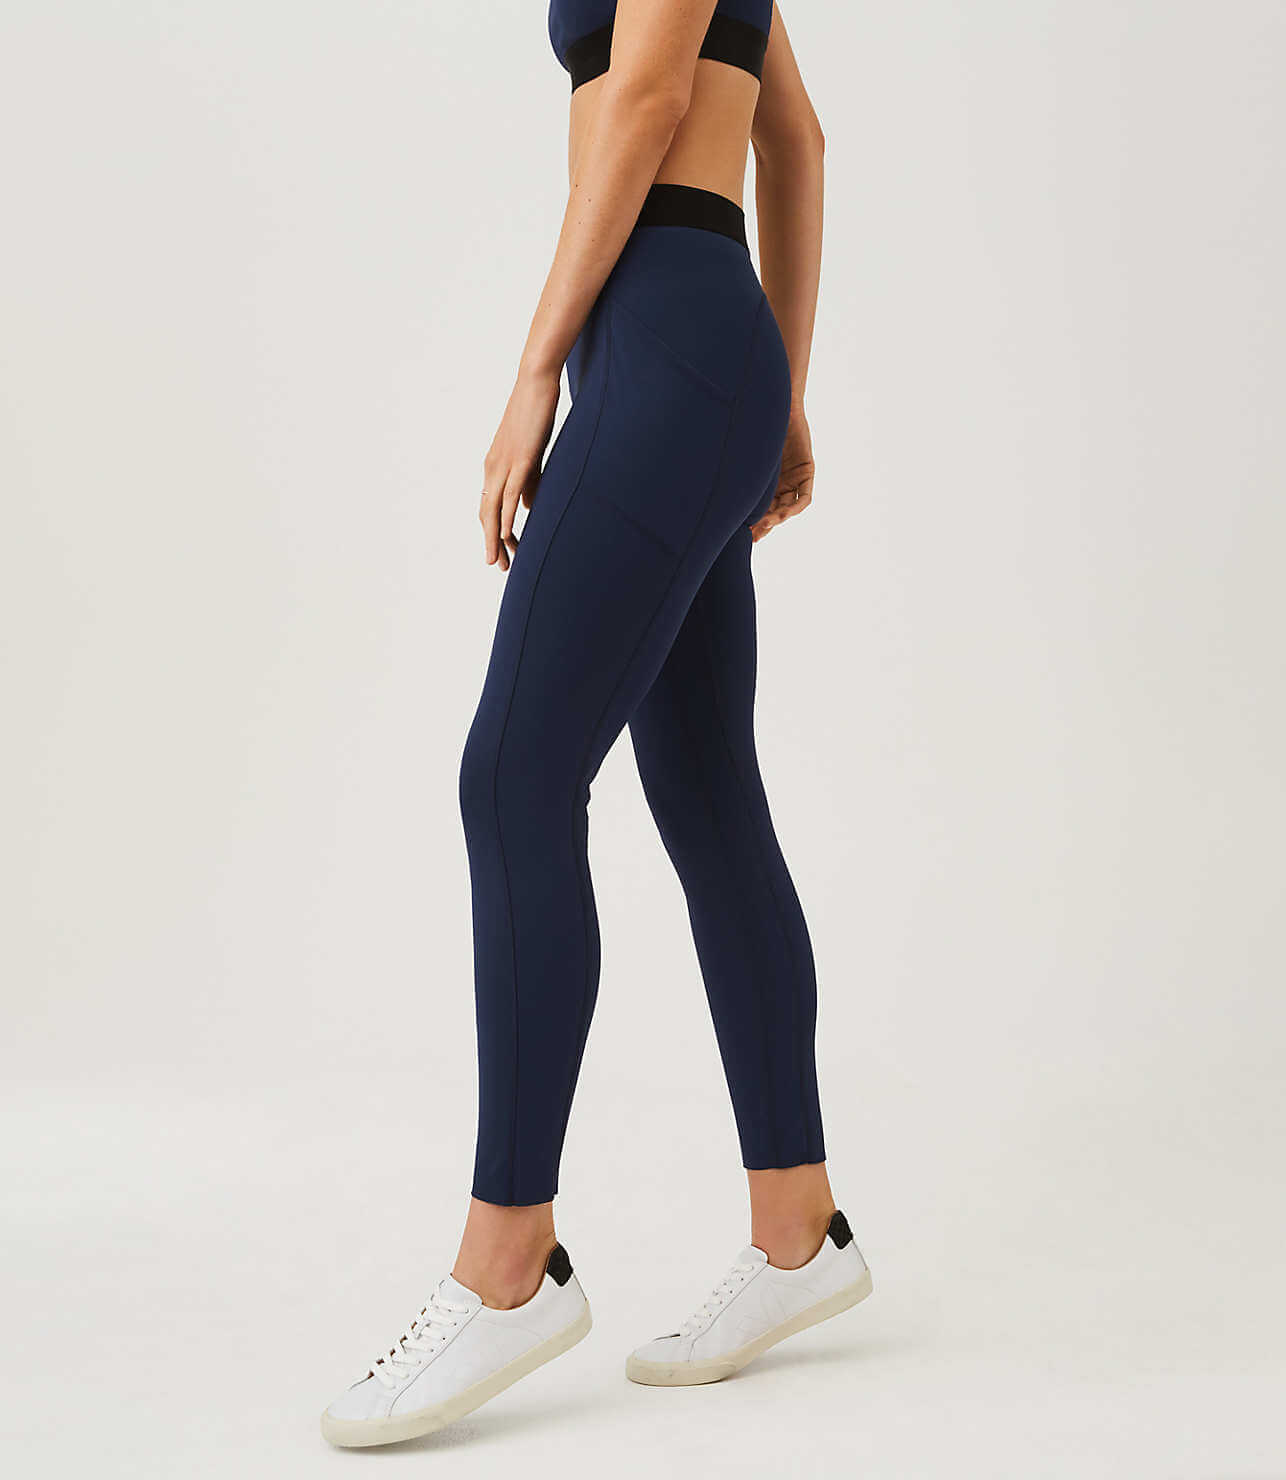 high rise workout legging - lou and grey